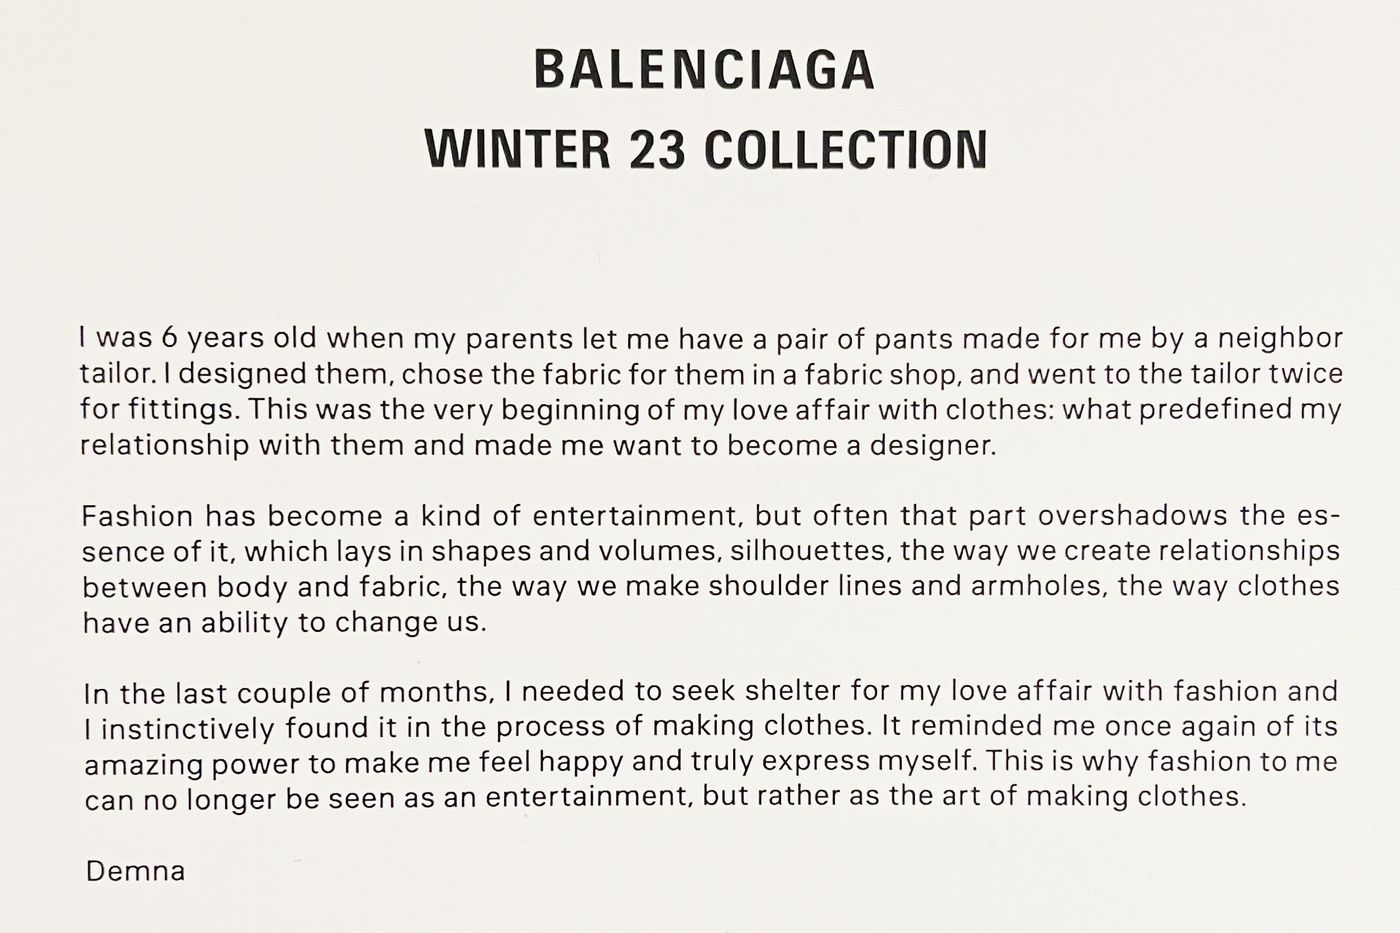 What to Know About the Balenciaga Ad Scandal